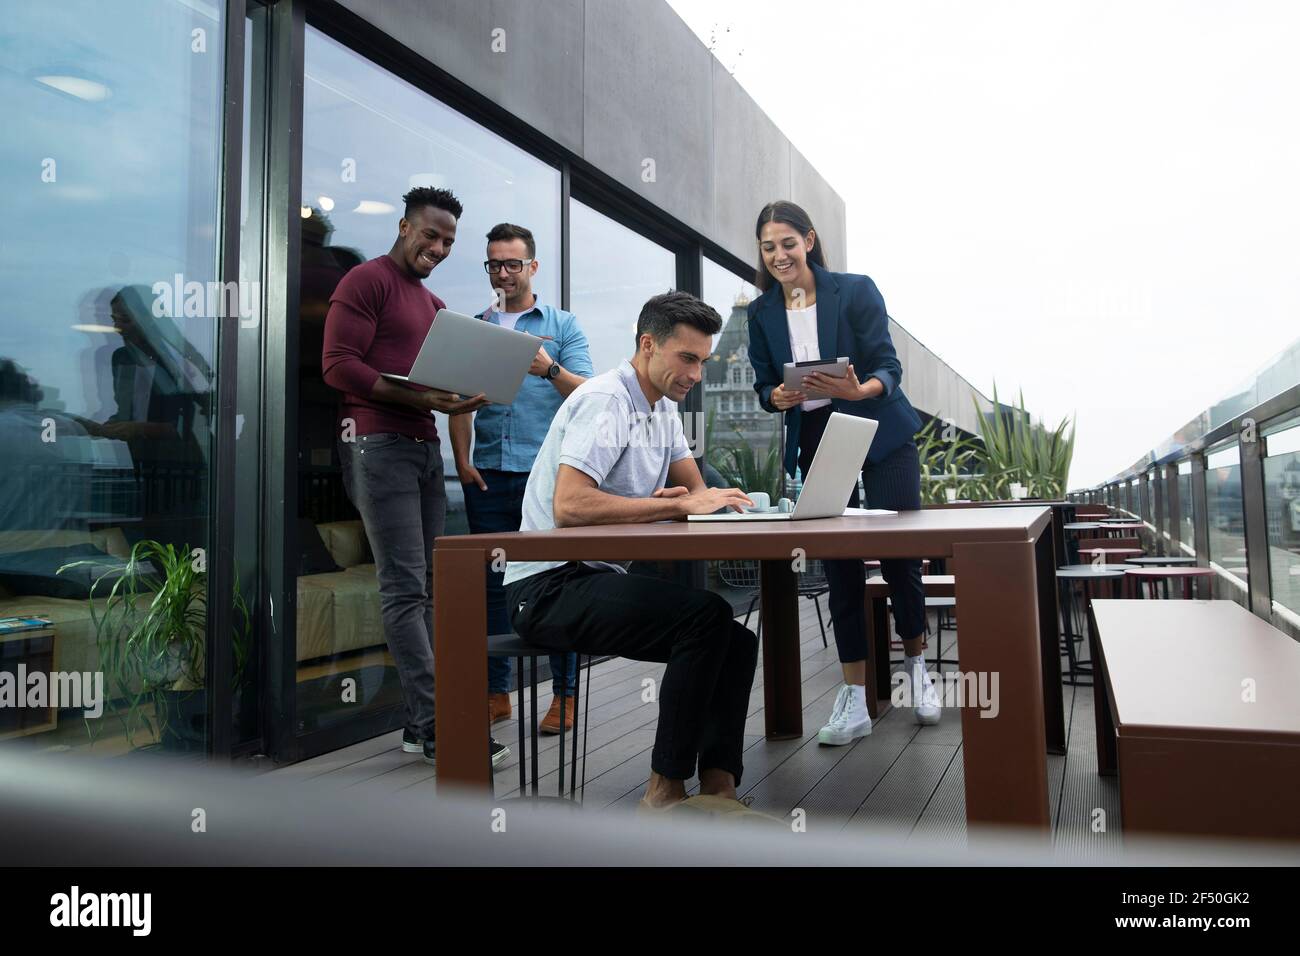 Business people working with laptops and digital tablet on balcony Stock Photo